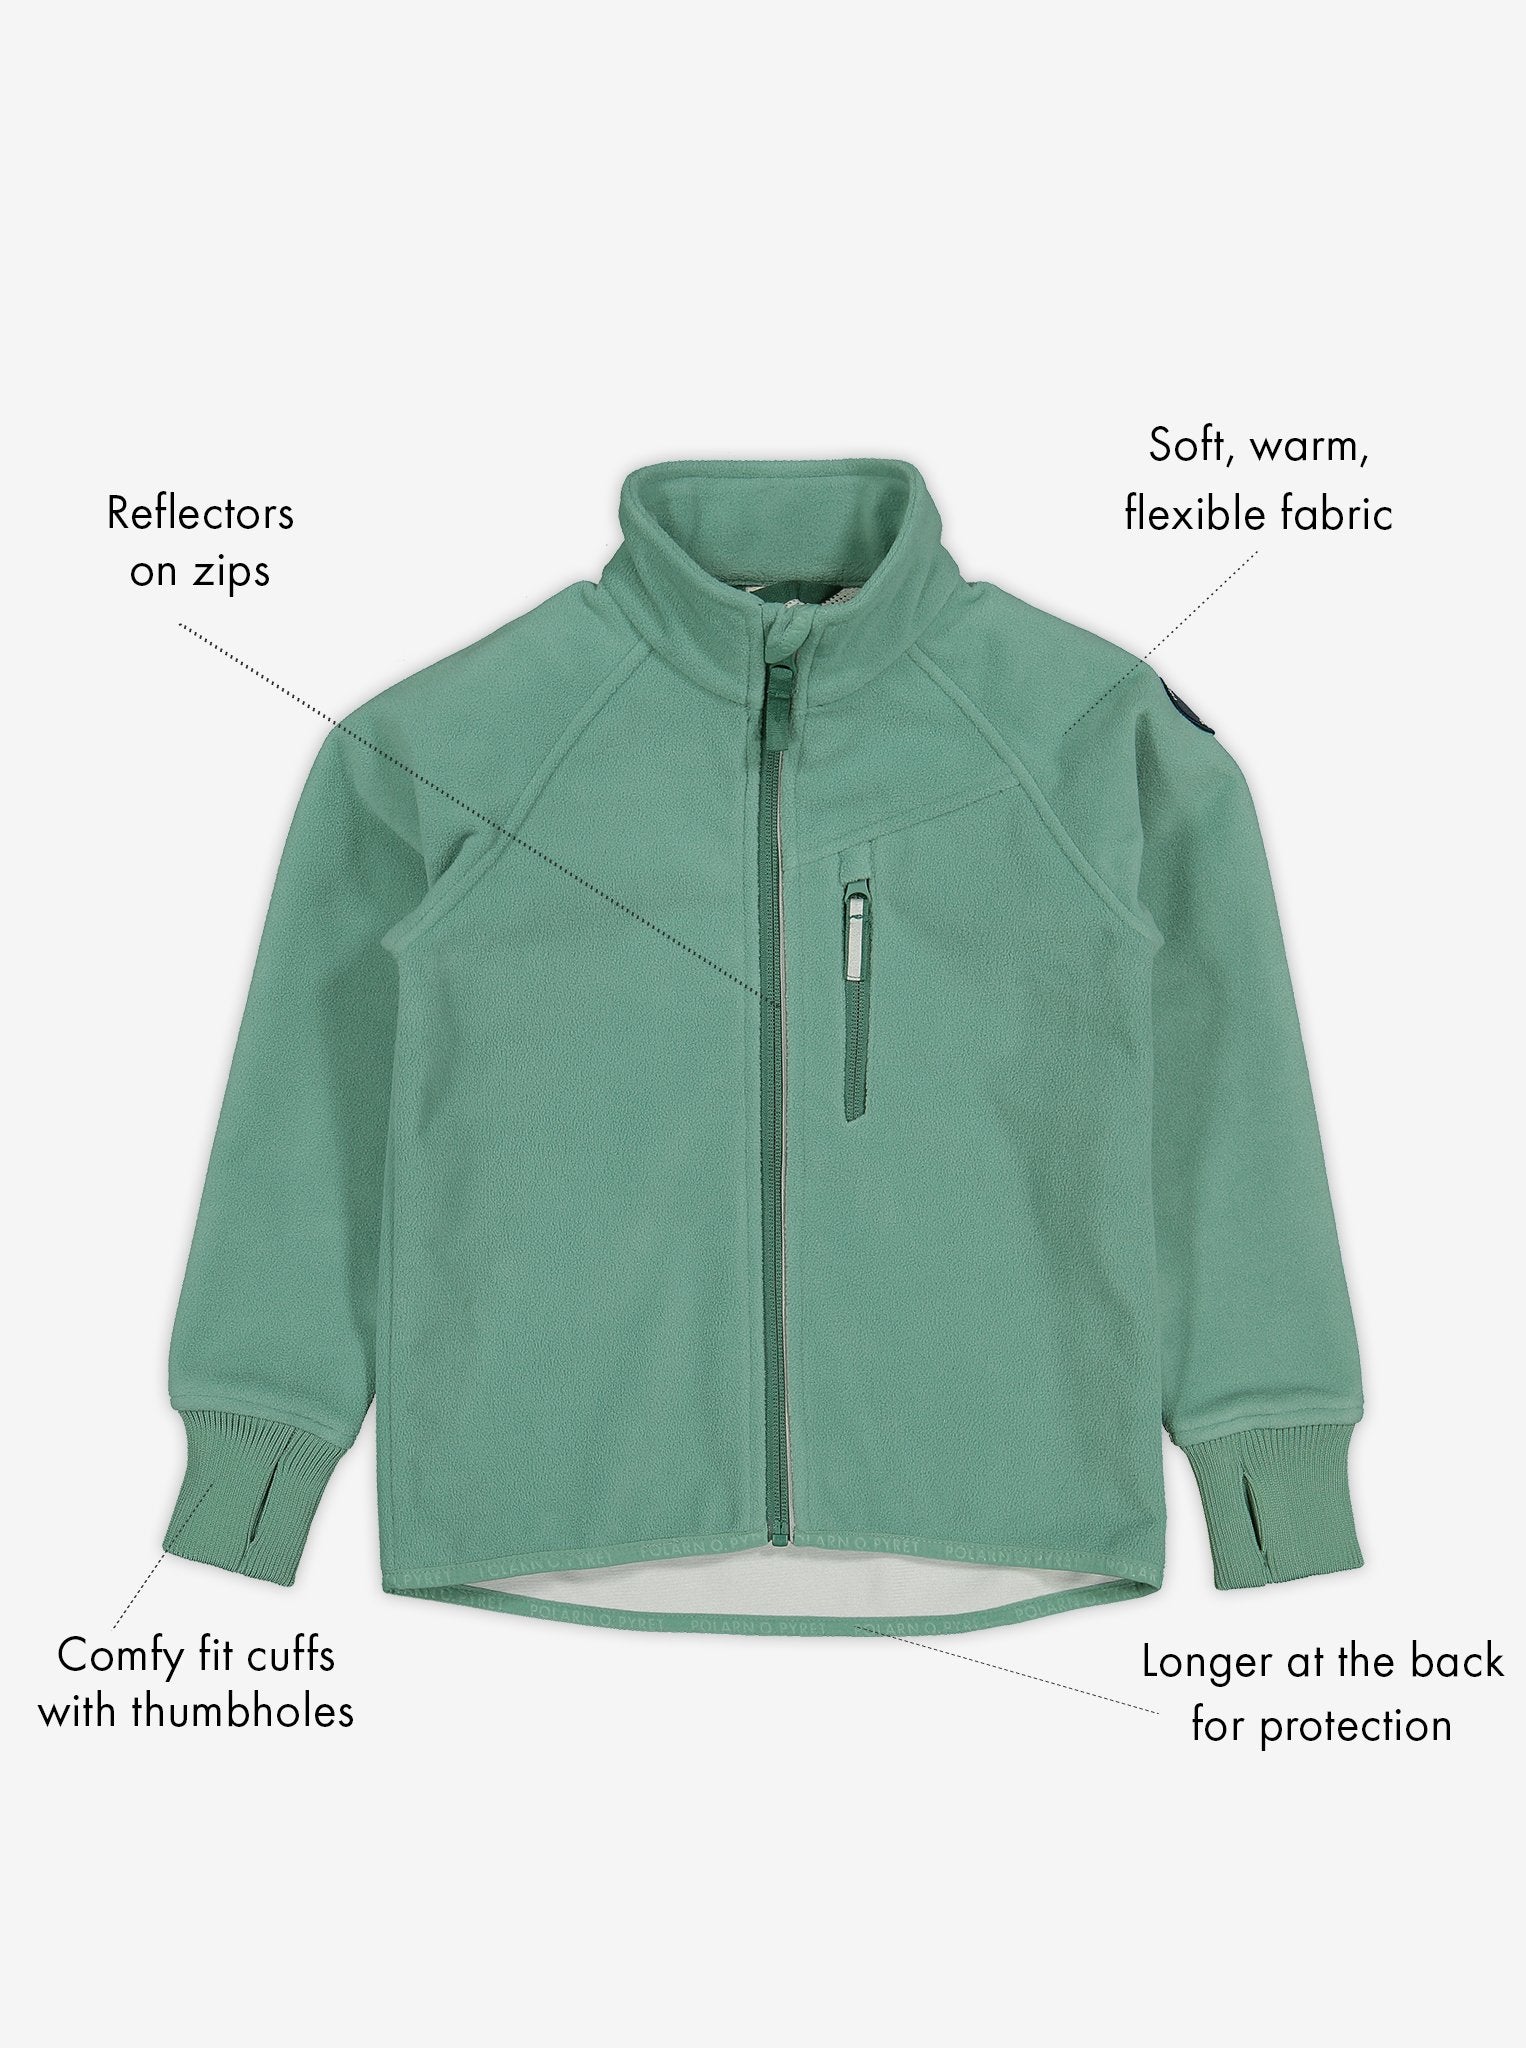 Green, kids waterproof fleece jacket with reflector on zips, cuffs with thumbholes. made of soft, warm and flexible fabric.